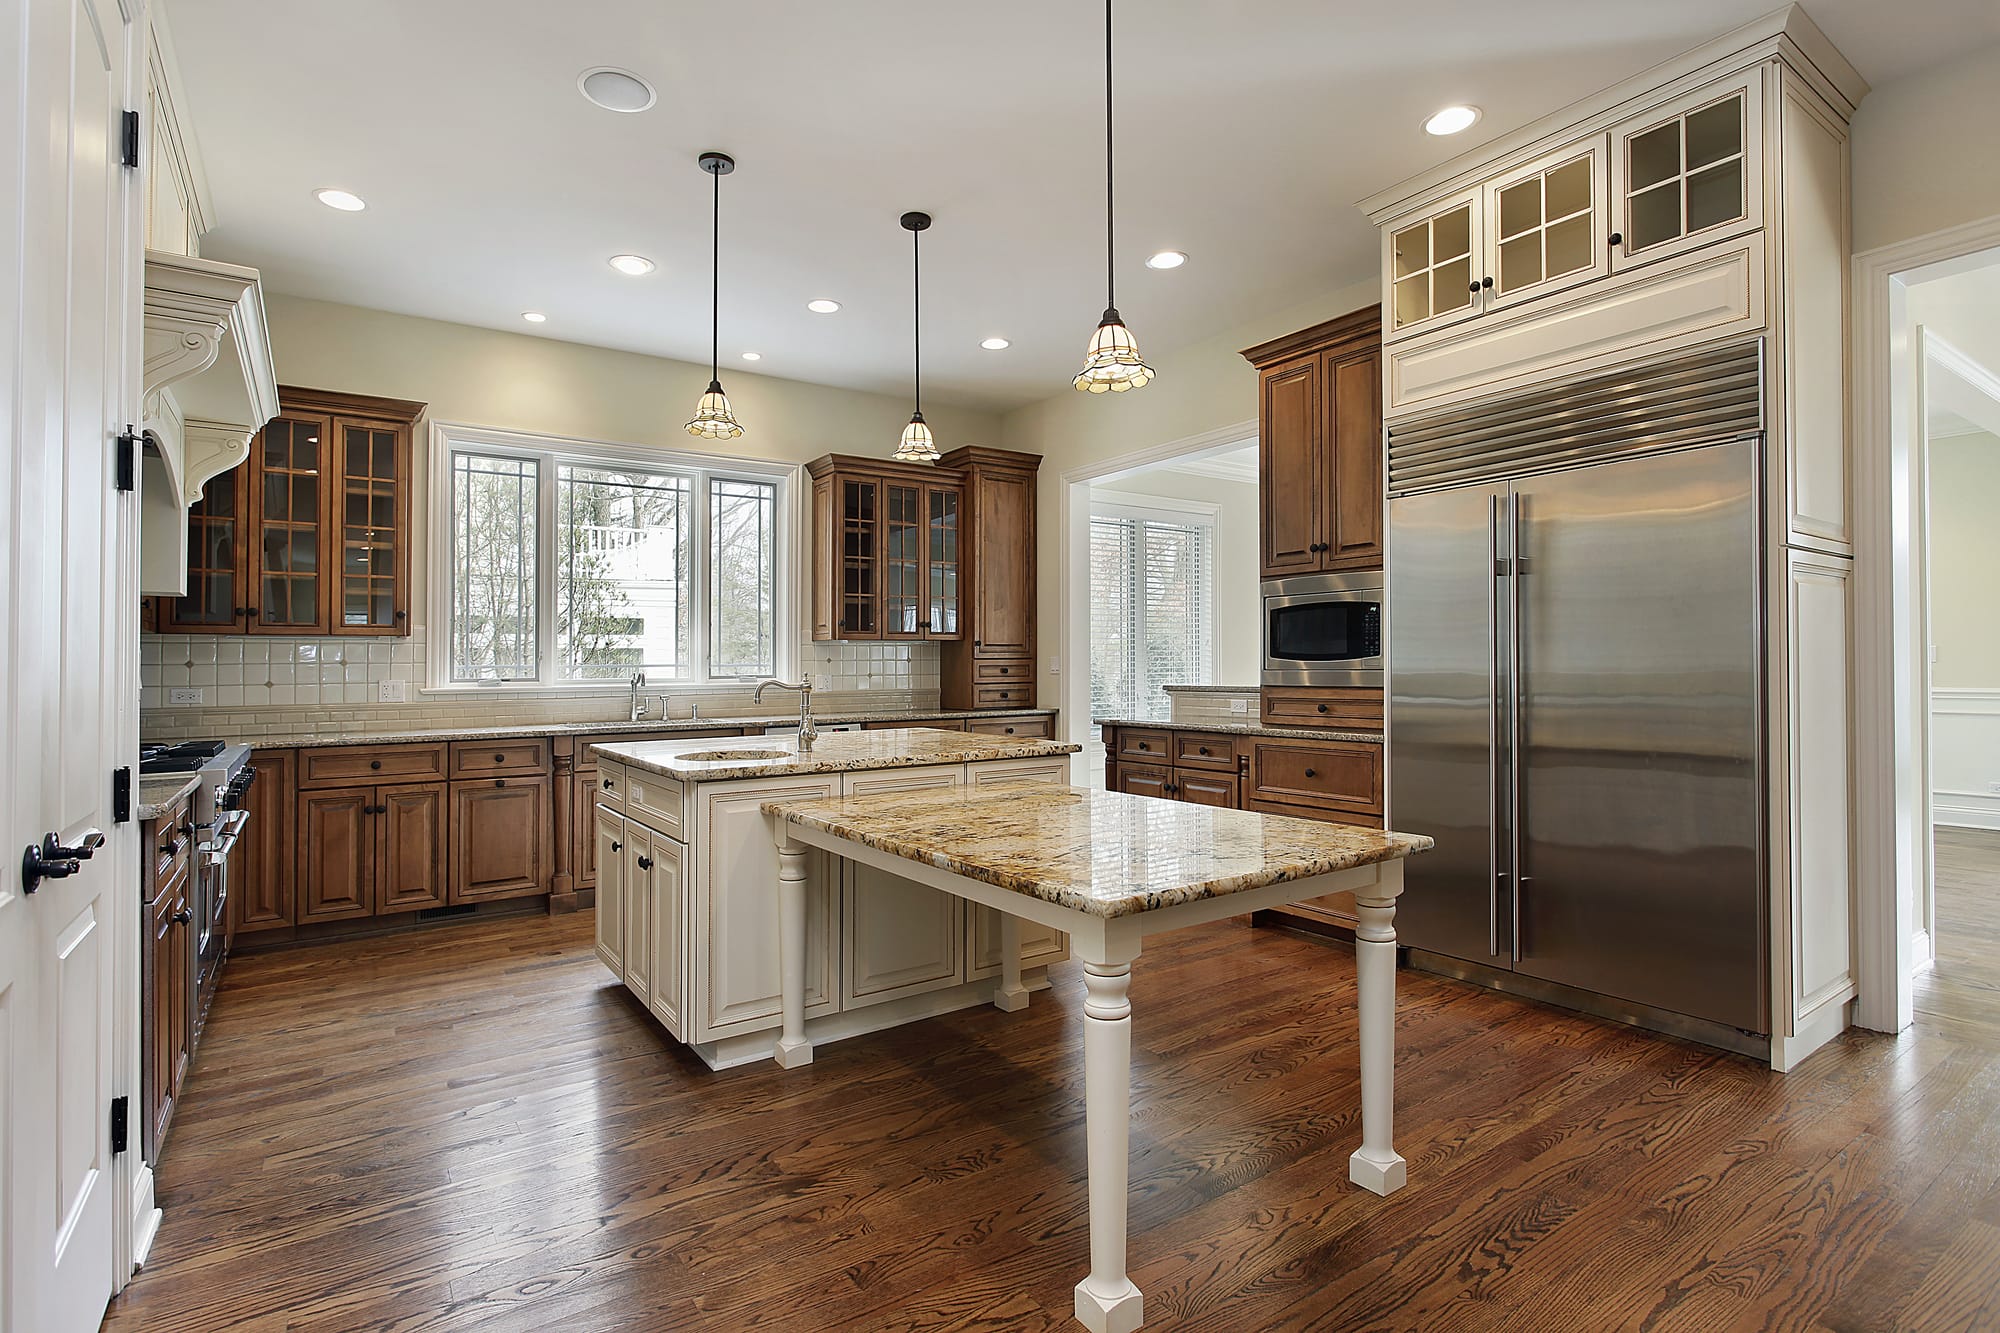 Choose Granite a Few Shades Lighter than Your Cabinets